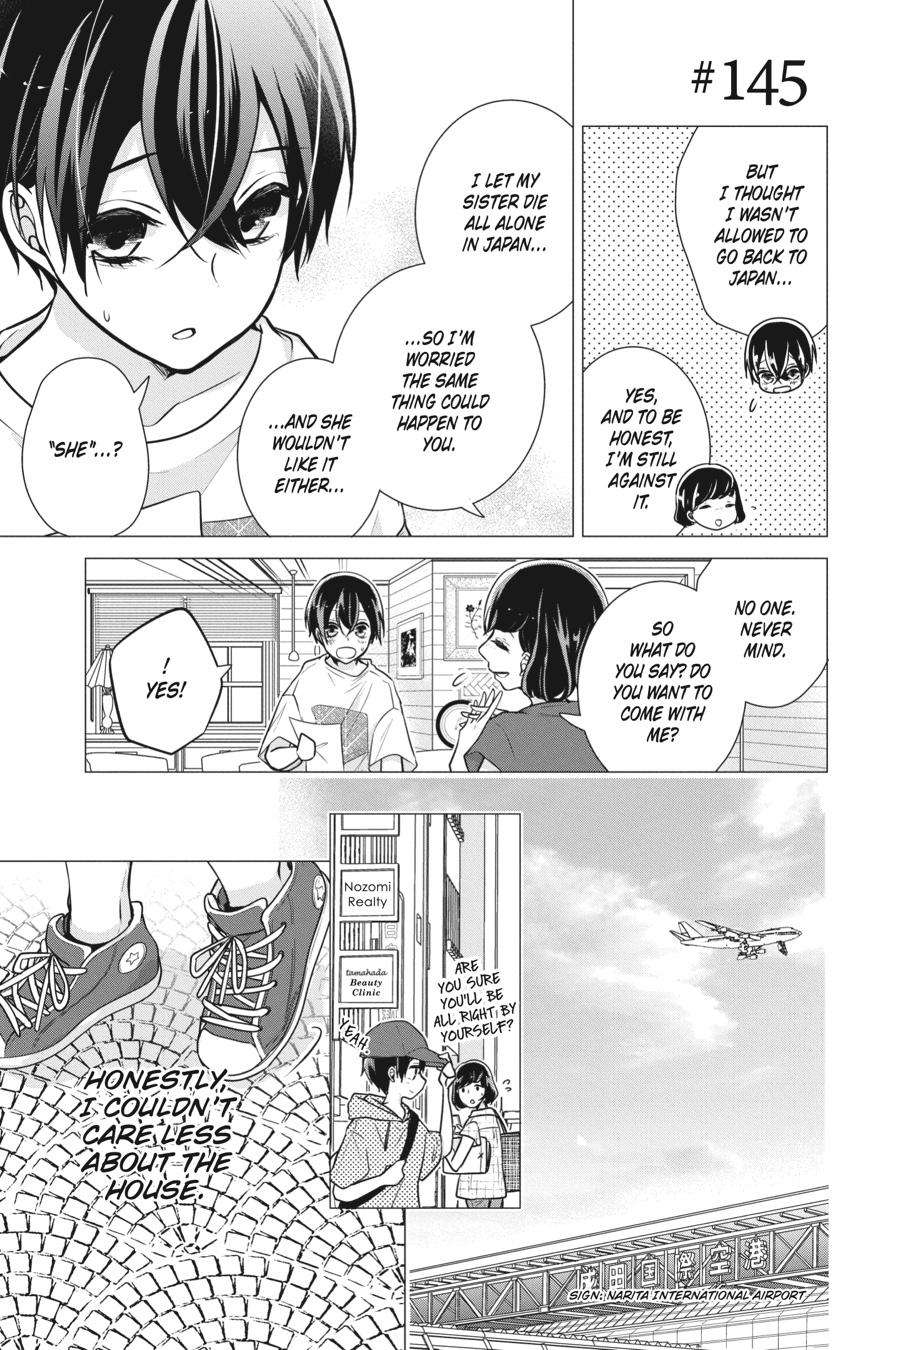 Love and Heart - chapter 145 - #1